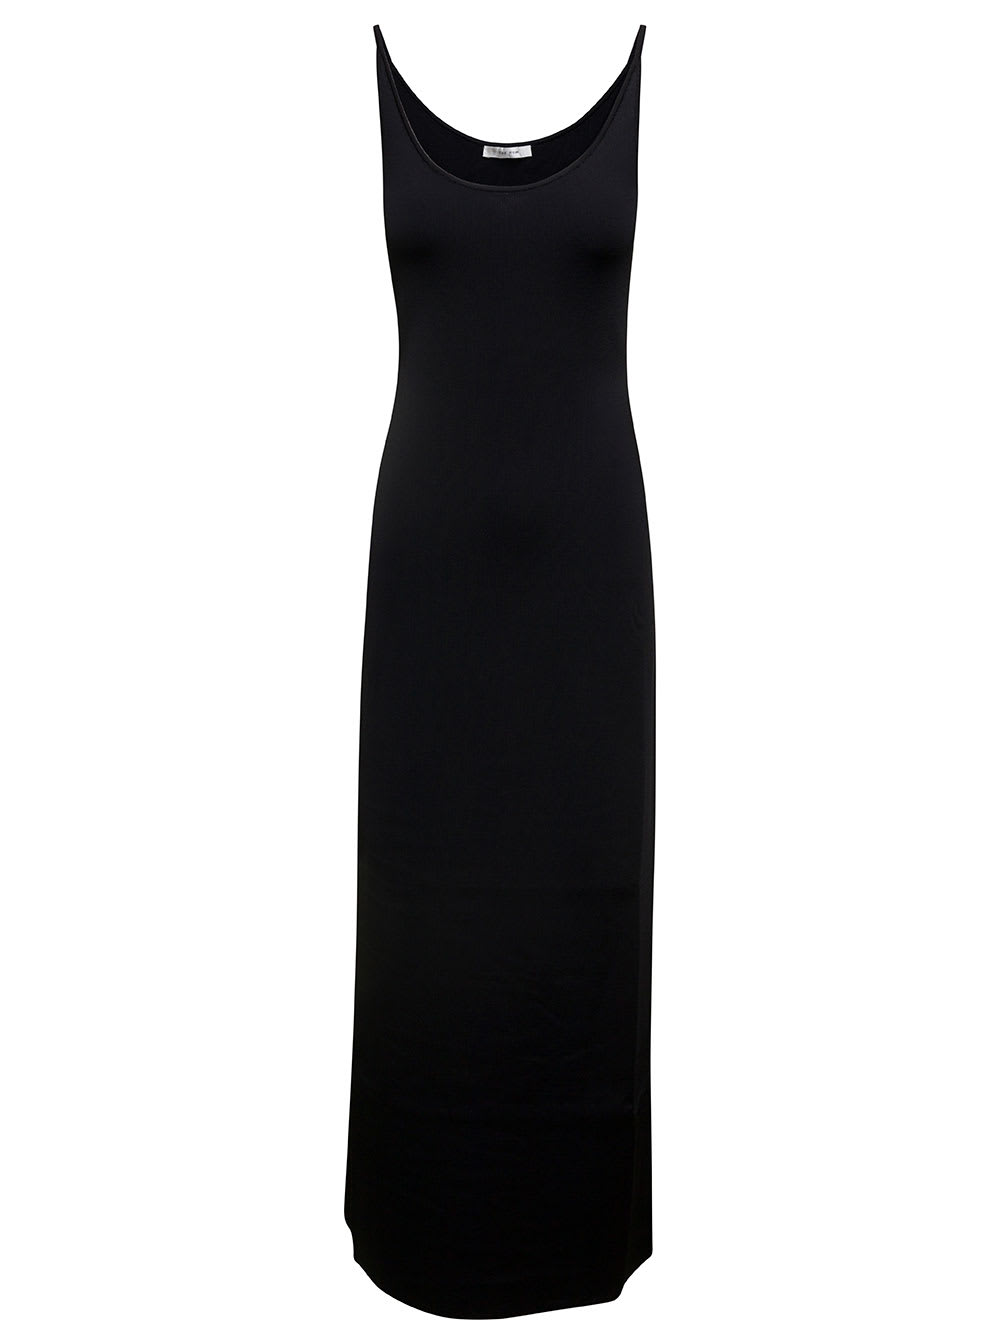 THE ROW CONSTANTINE LONG BLACK DRESS WITH THIN STRAPS IN VISCOSA WOMAN